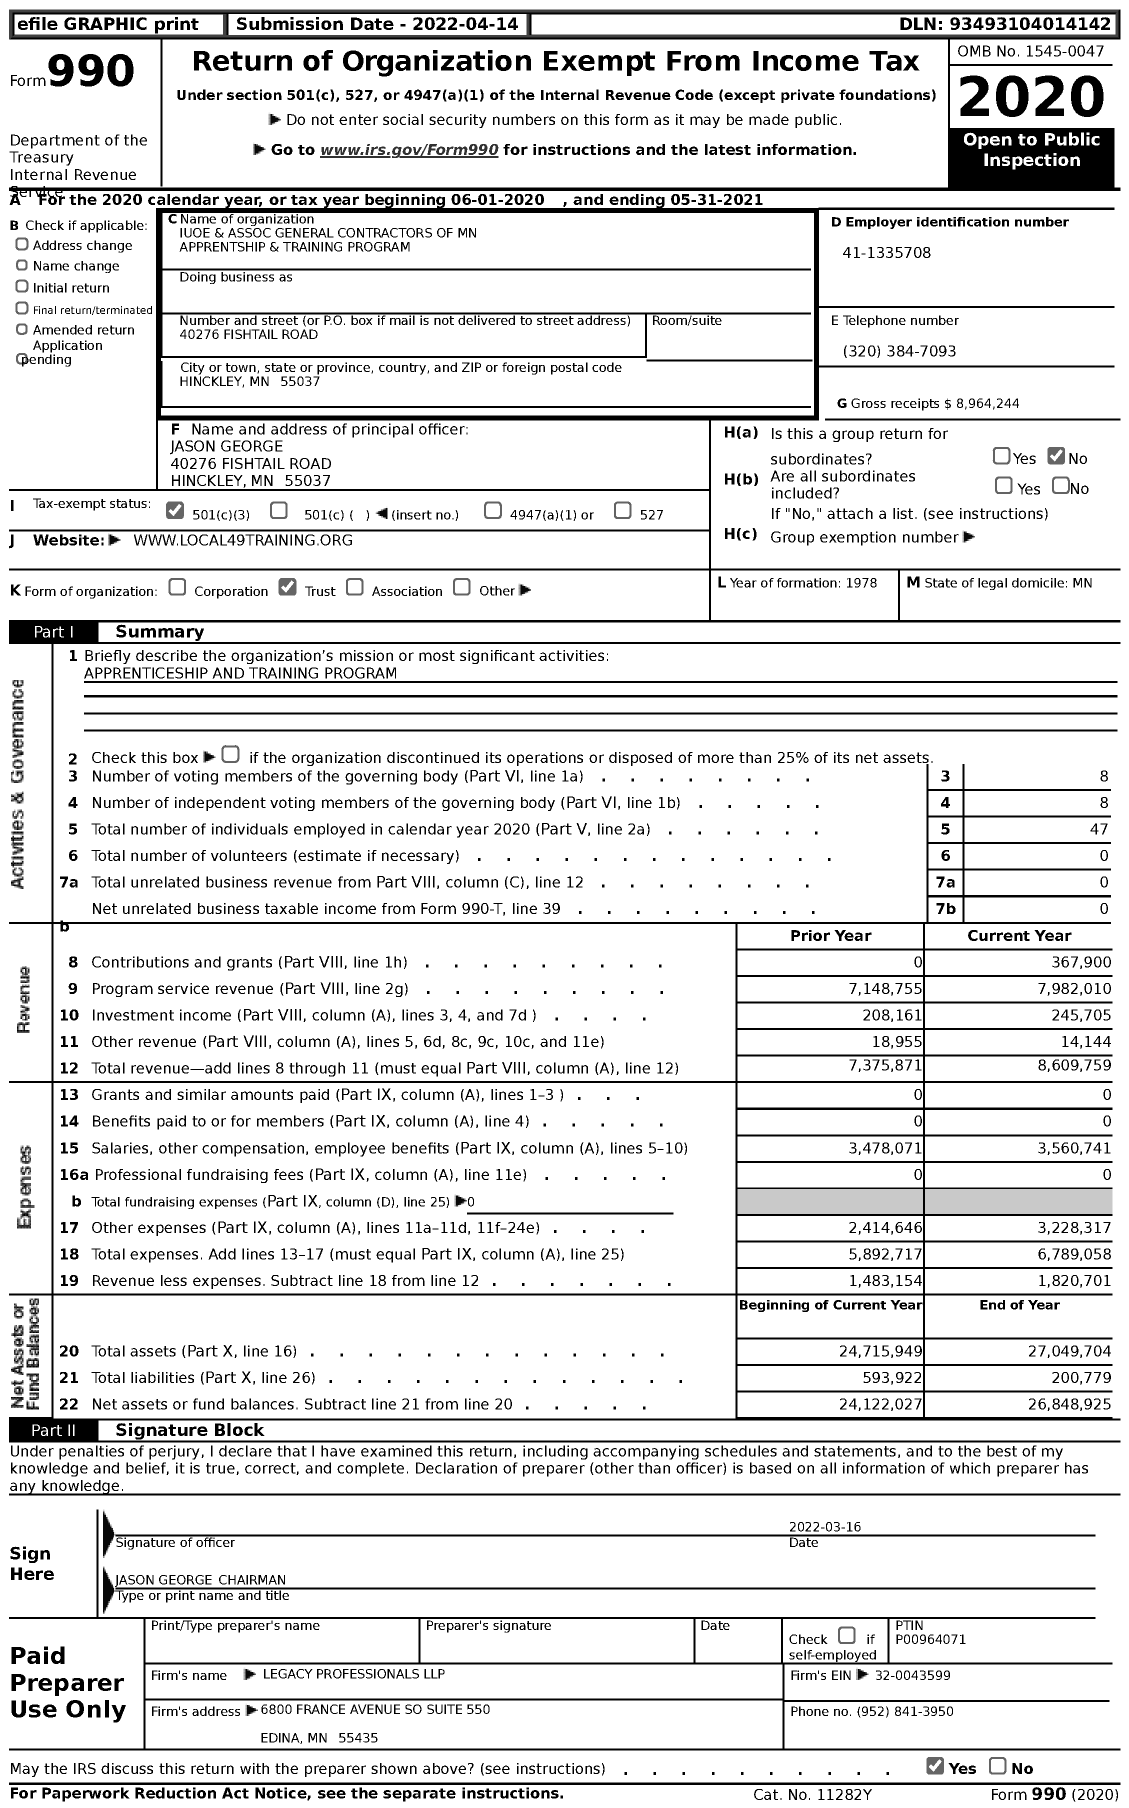 Image of first page of 2020 Form 990 for Iuoe and Association General Contractors of MN Apprenticeship and Training Program